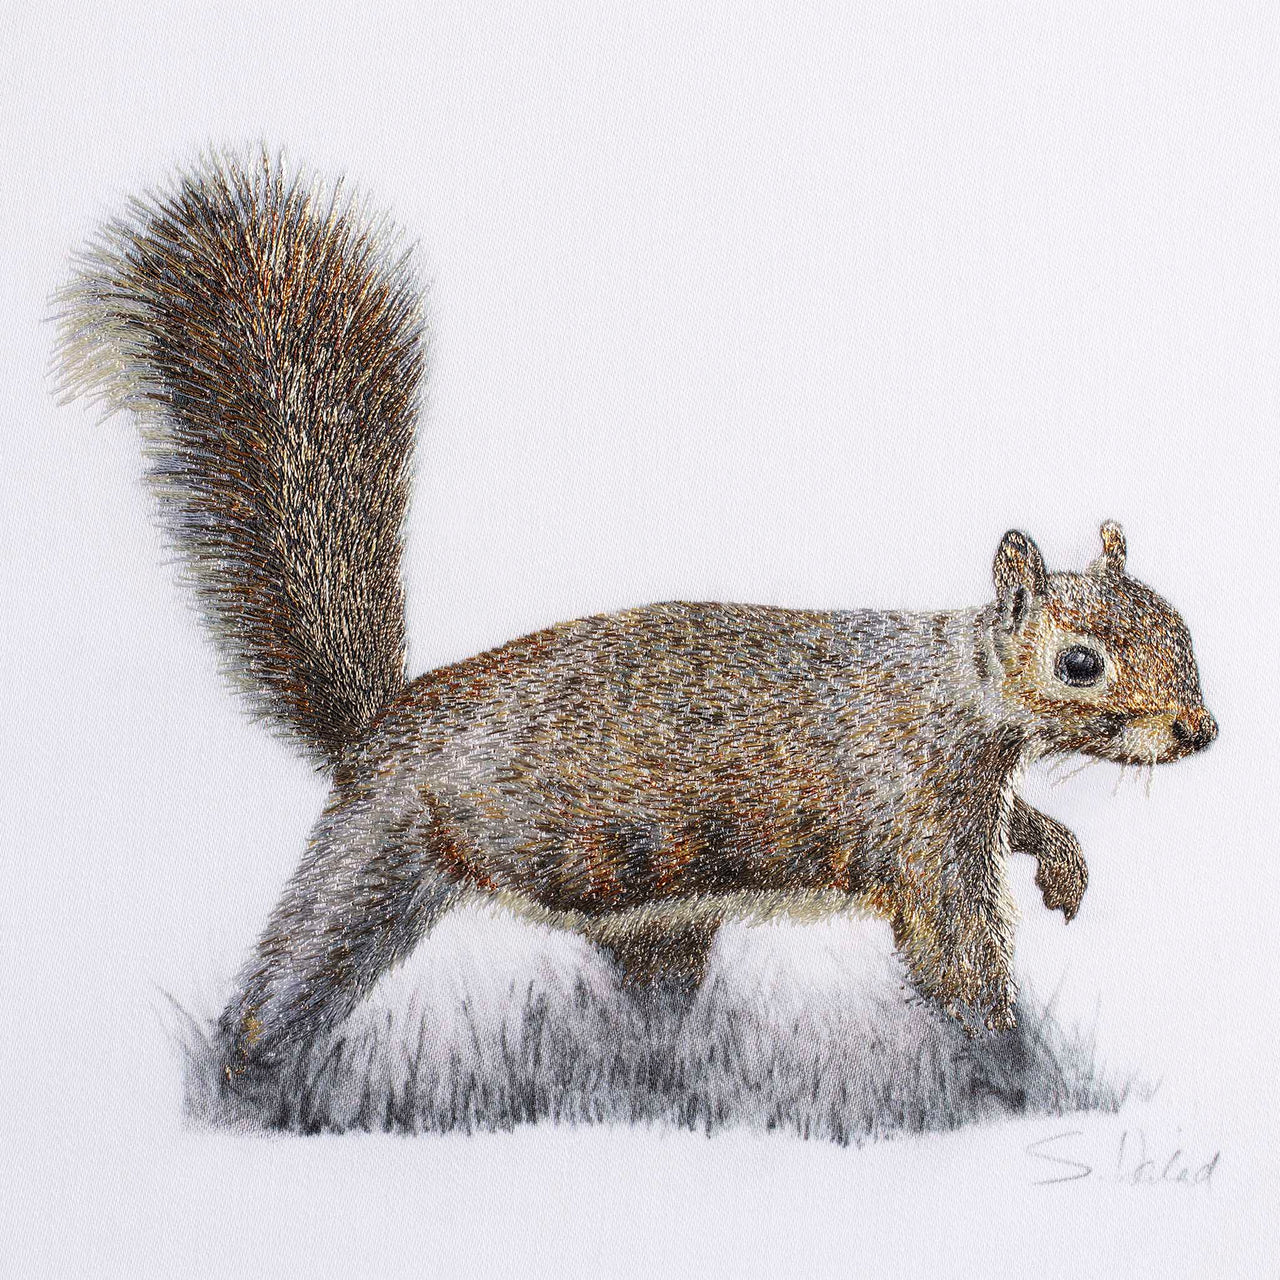 Hyde Squirrel artwork combining tonal pencil drawing with hand embroidery